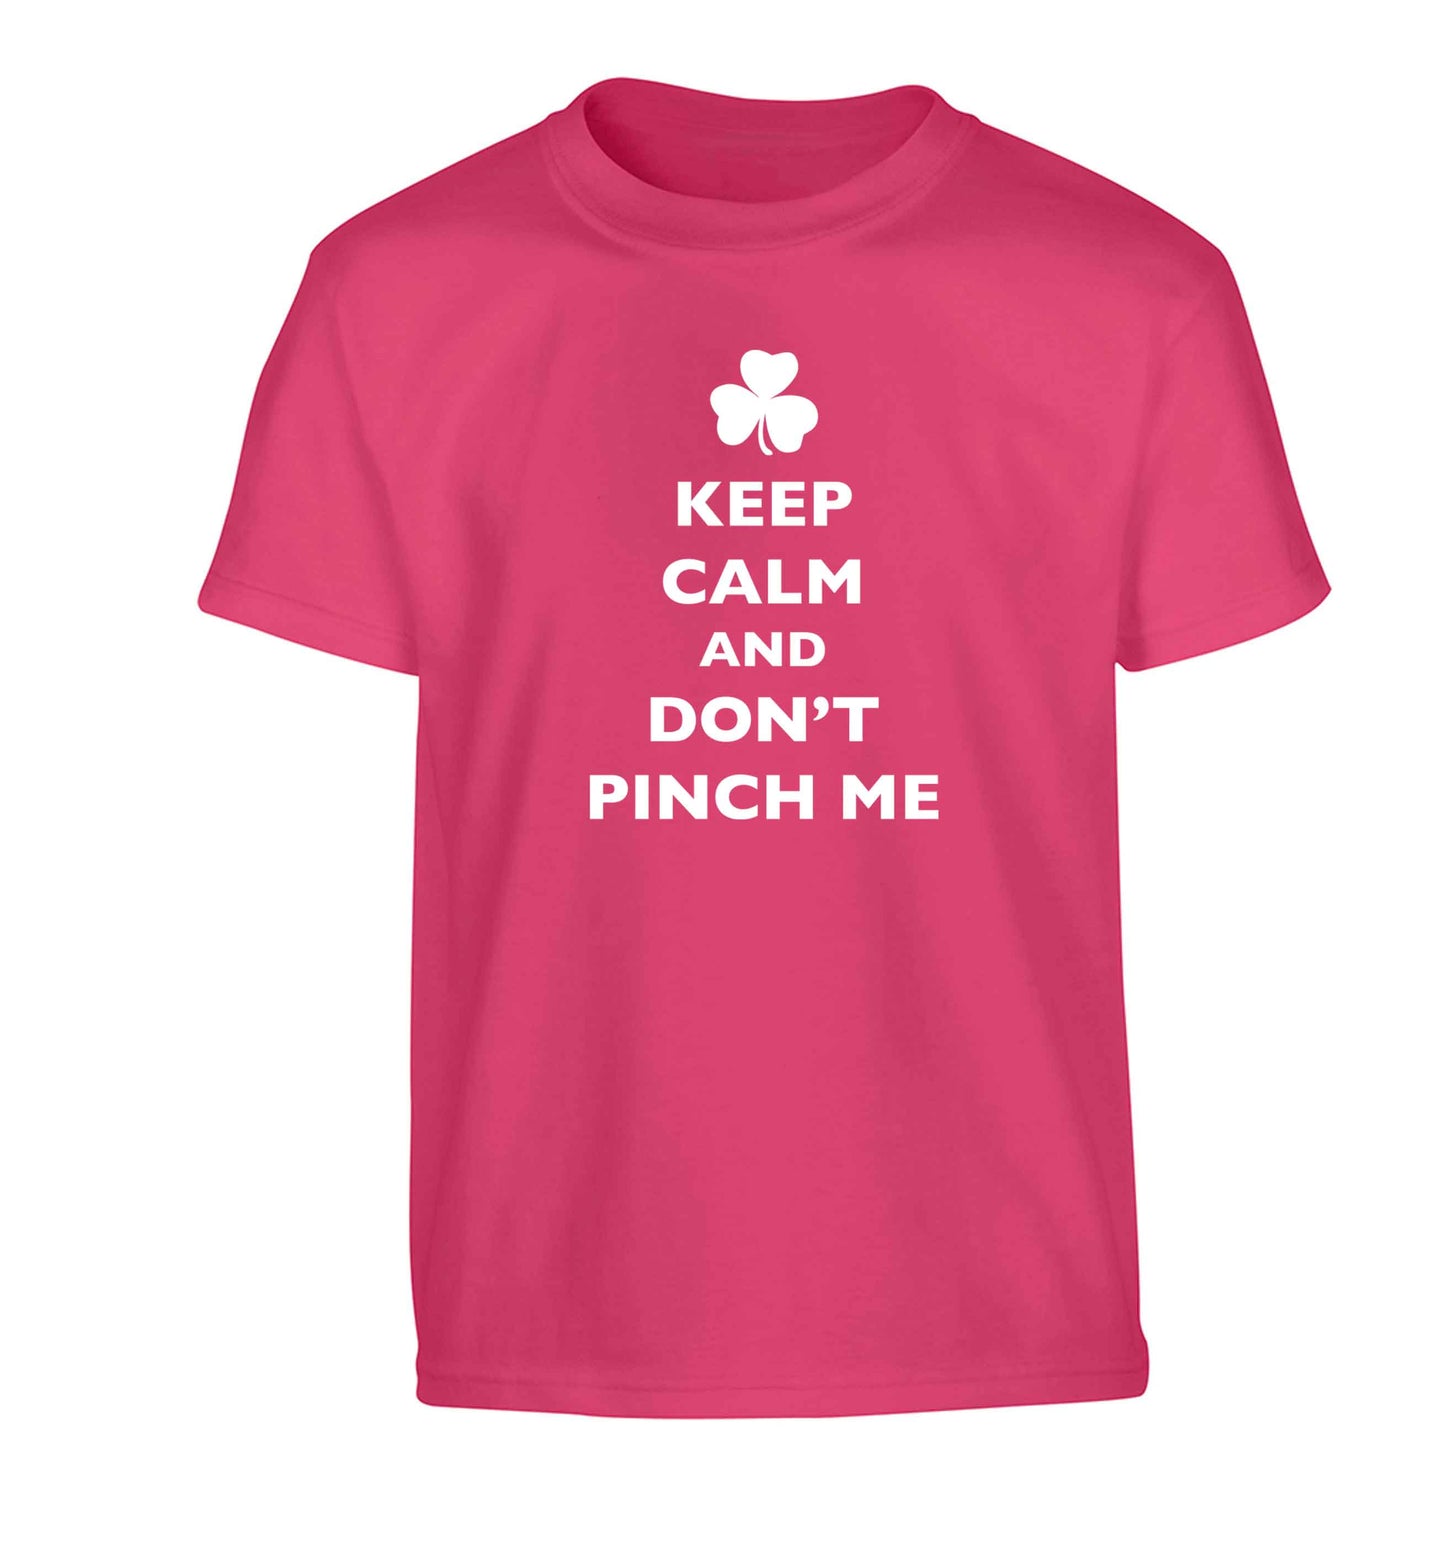 Keep calm and don't pinch me Children's pink Tshirt 12-13 Years